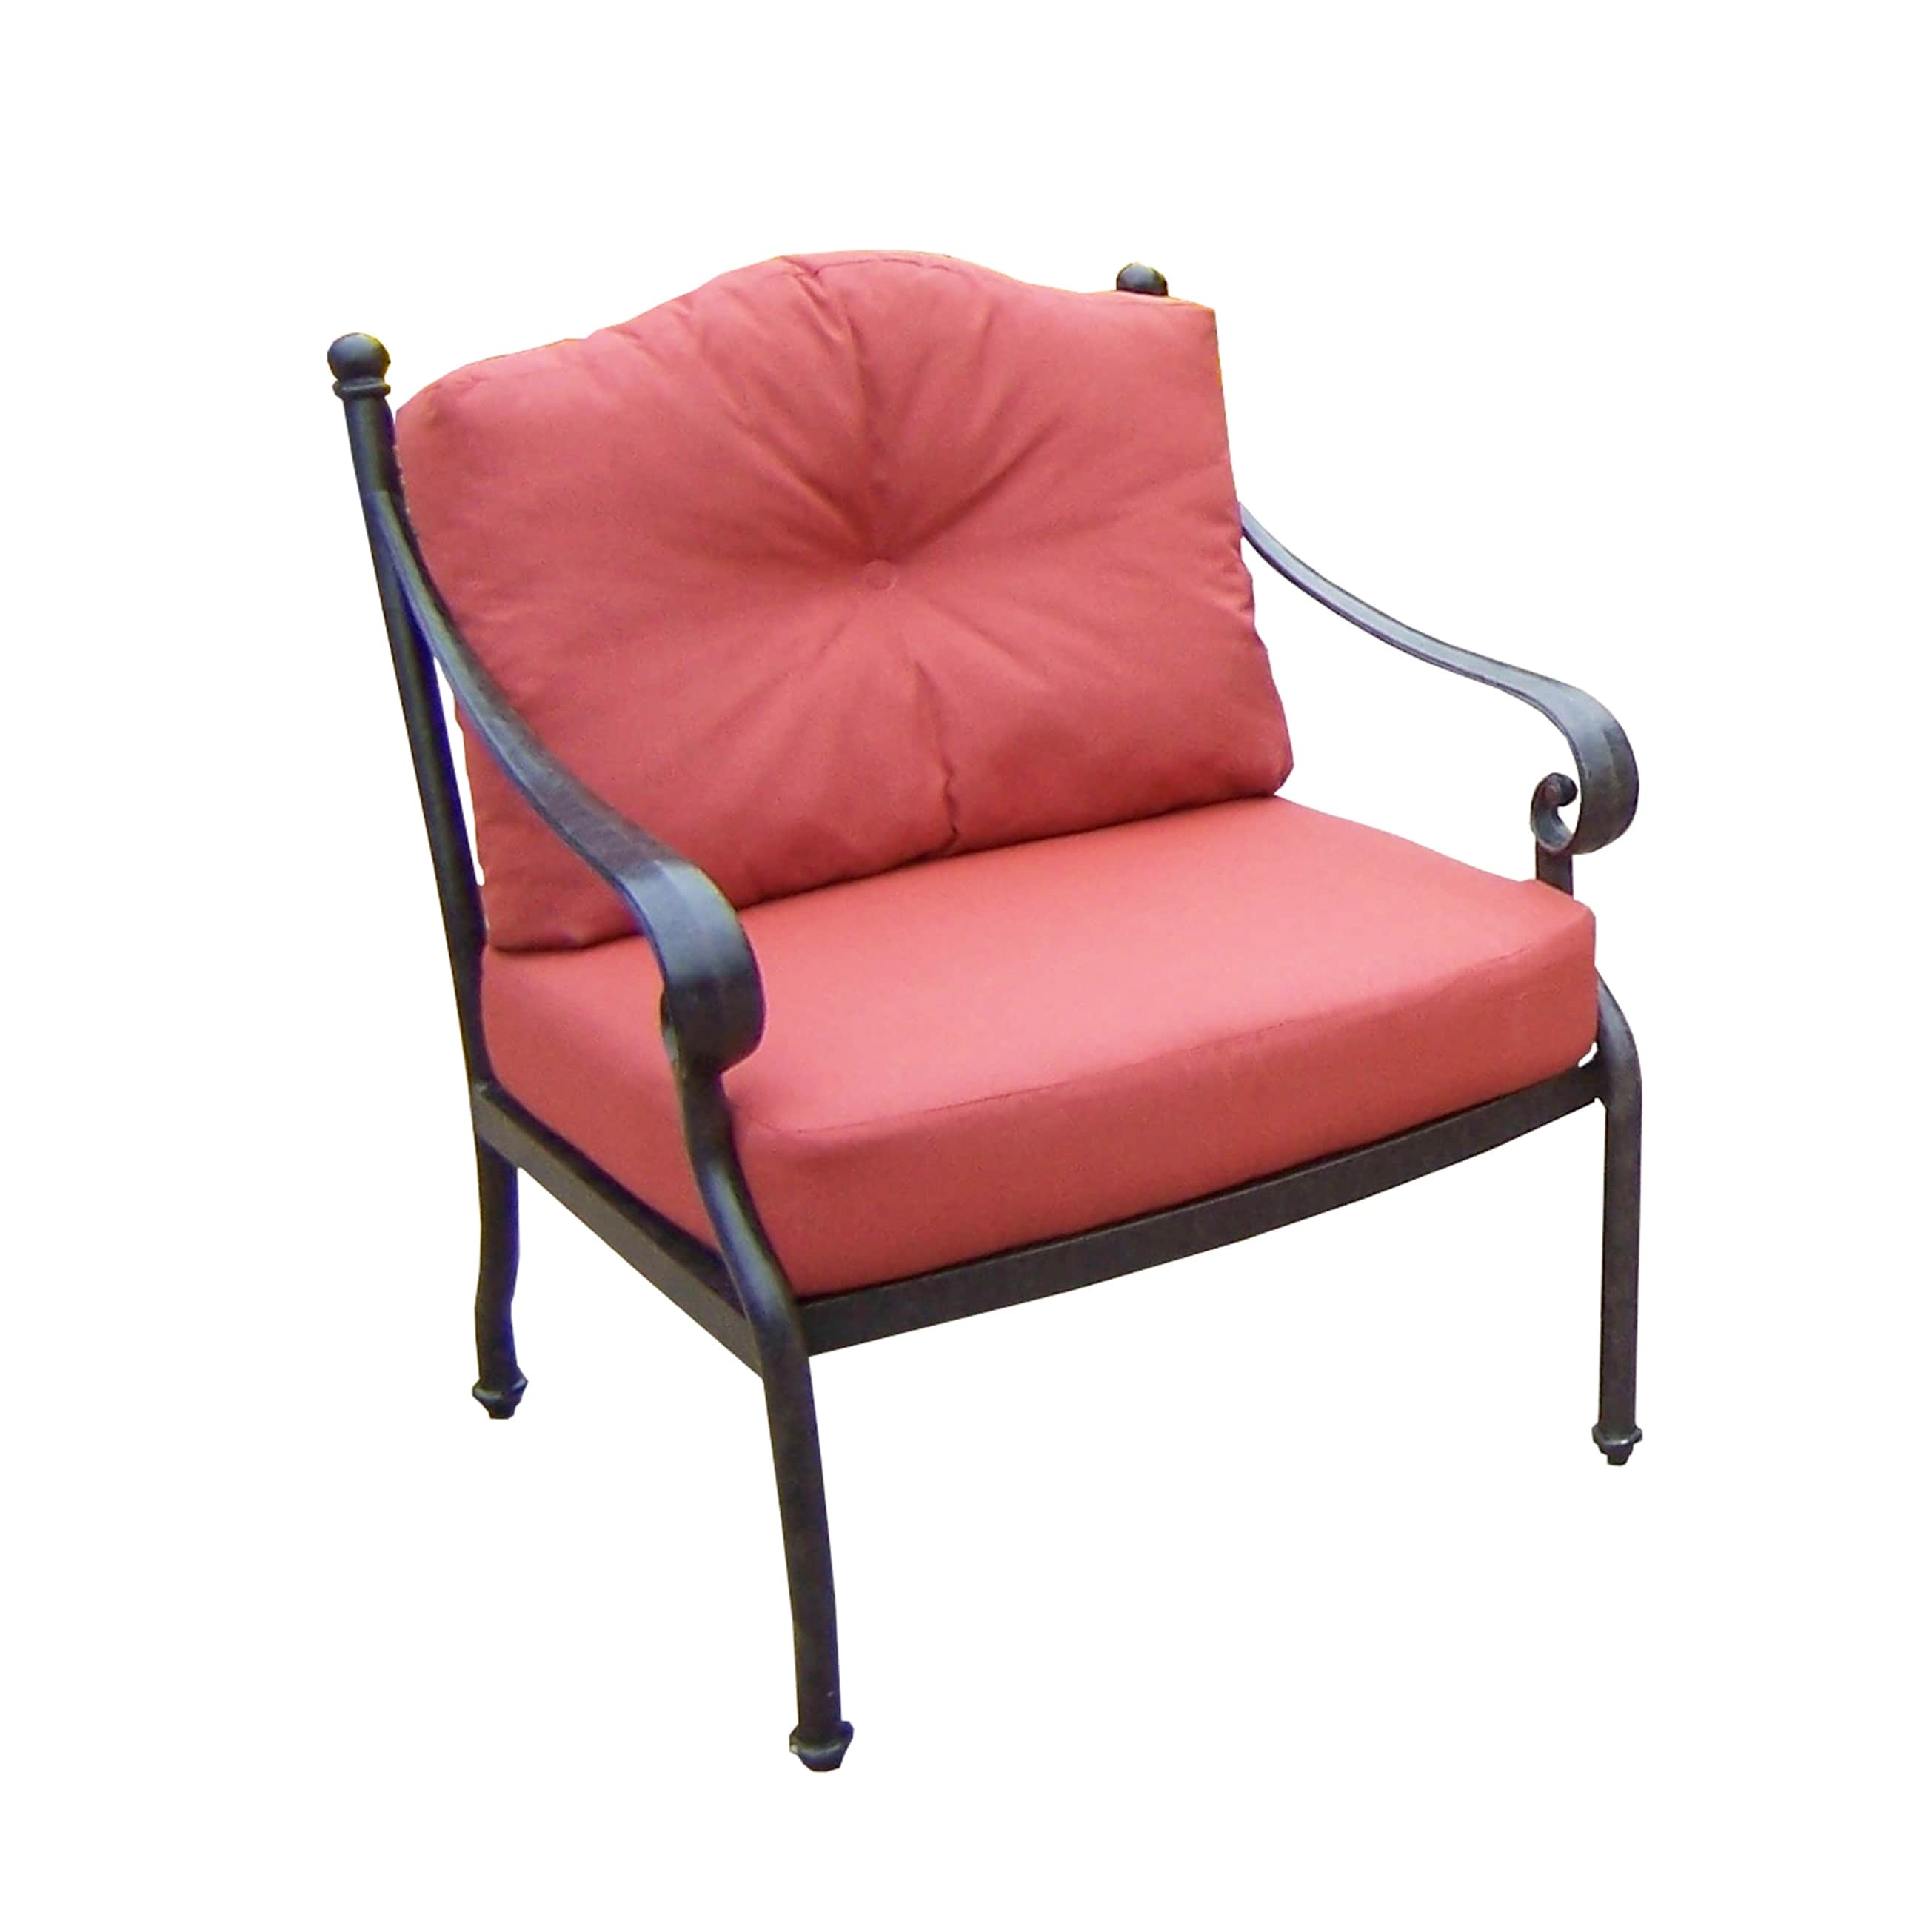 Aluminum Deep Seating Redish Pink Double-cushioned Outdoor Brown Patio Club Chair